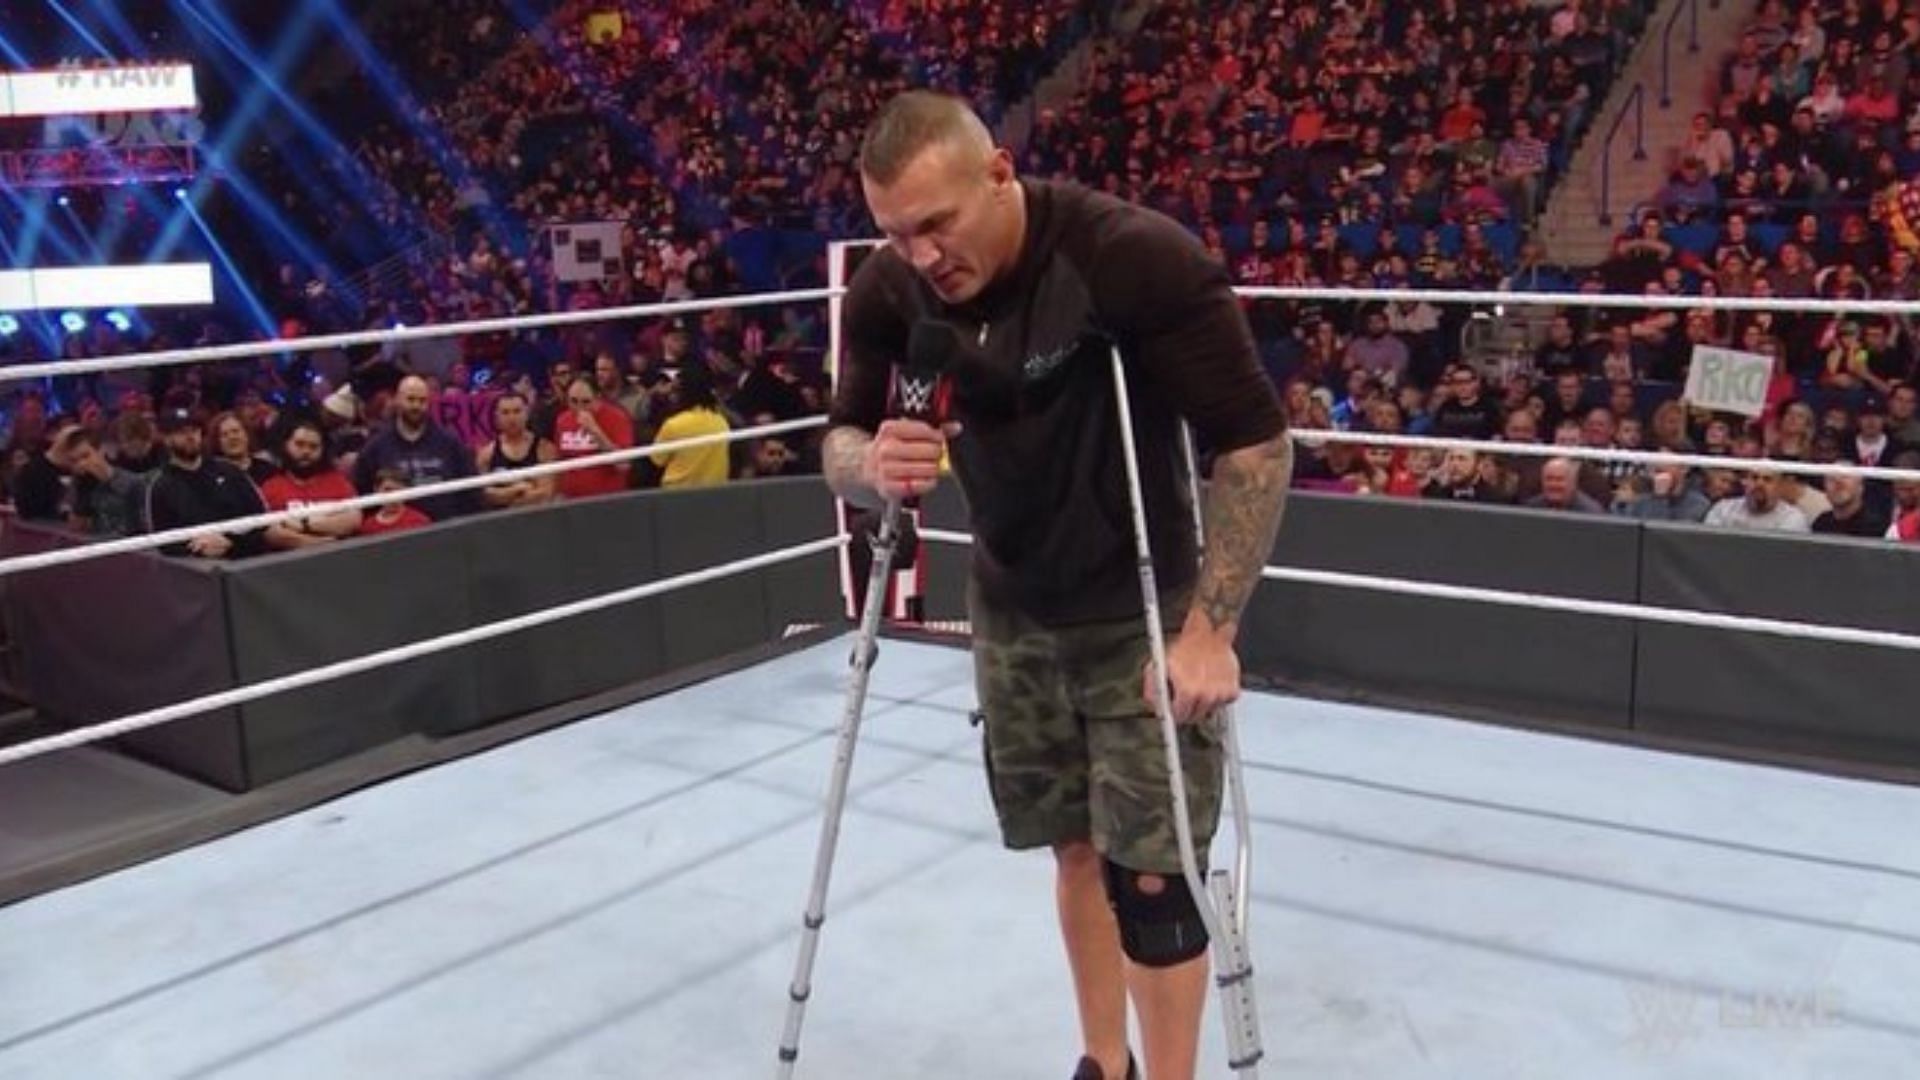 Major update on Randy Orton's physical condition amid recent hiatus